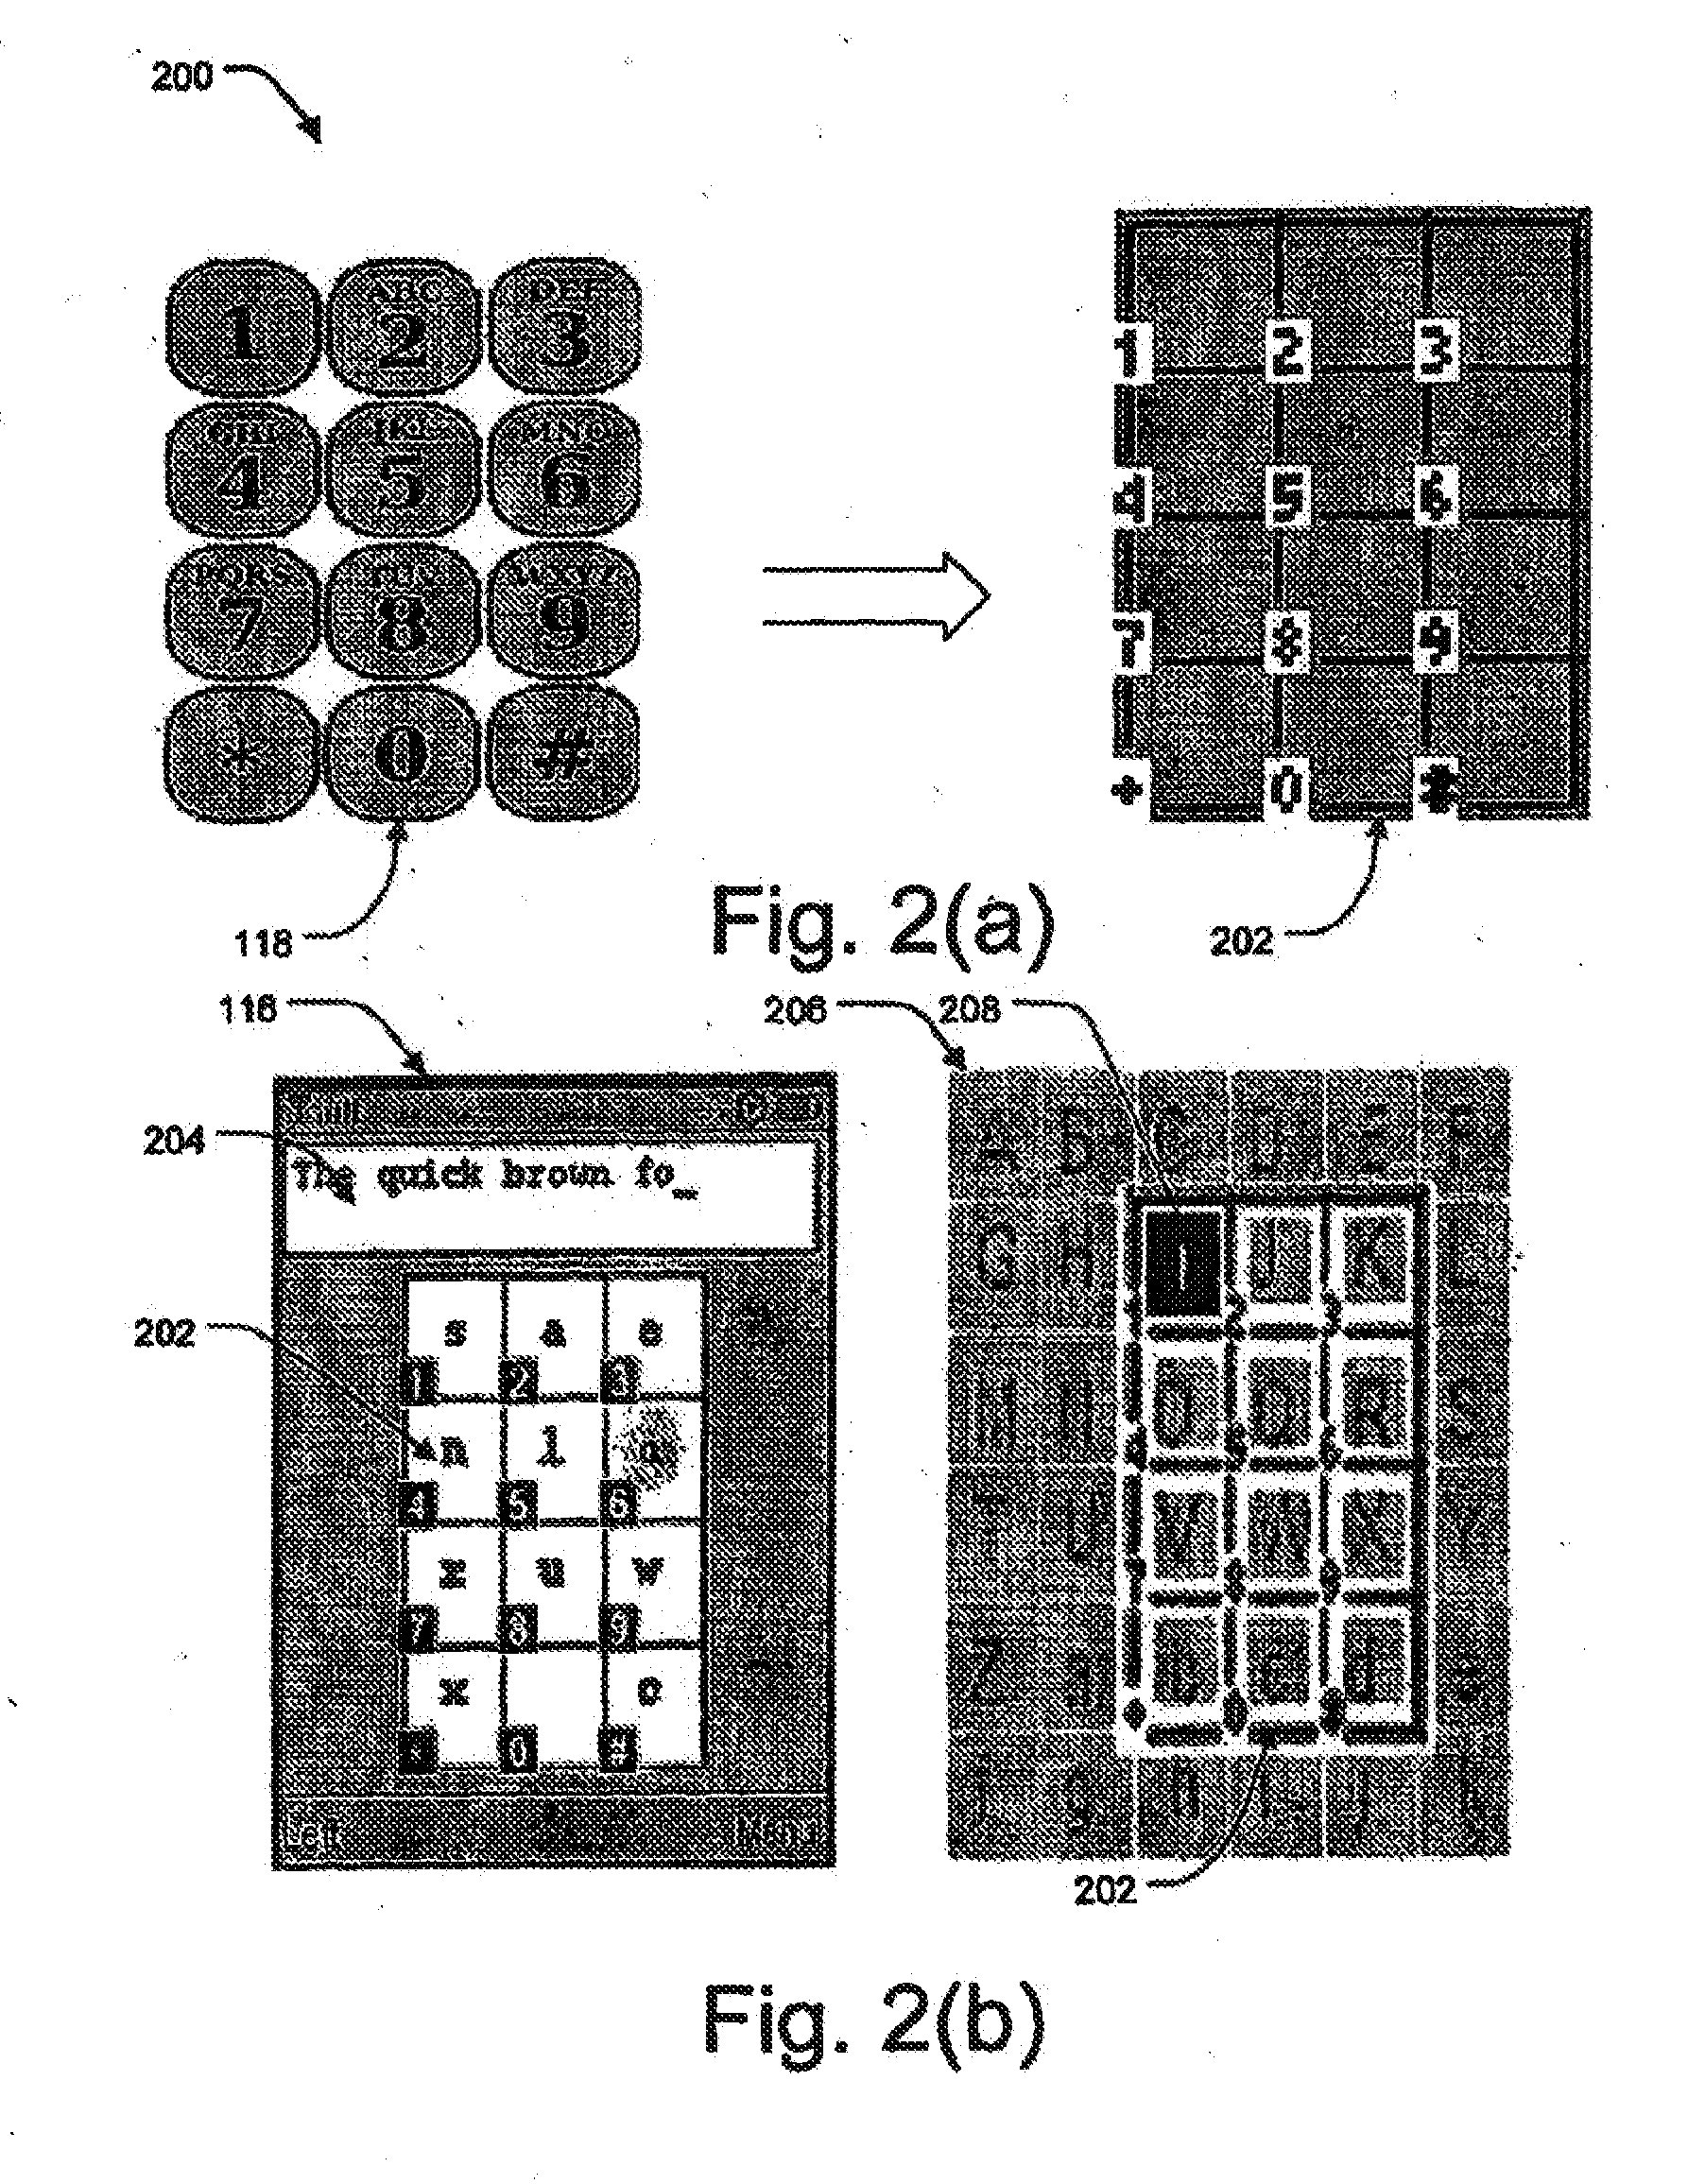 Systems and methods for text input for touch-typable devices